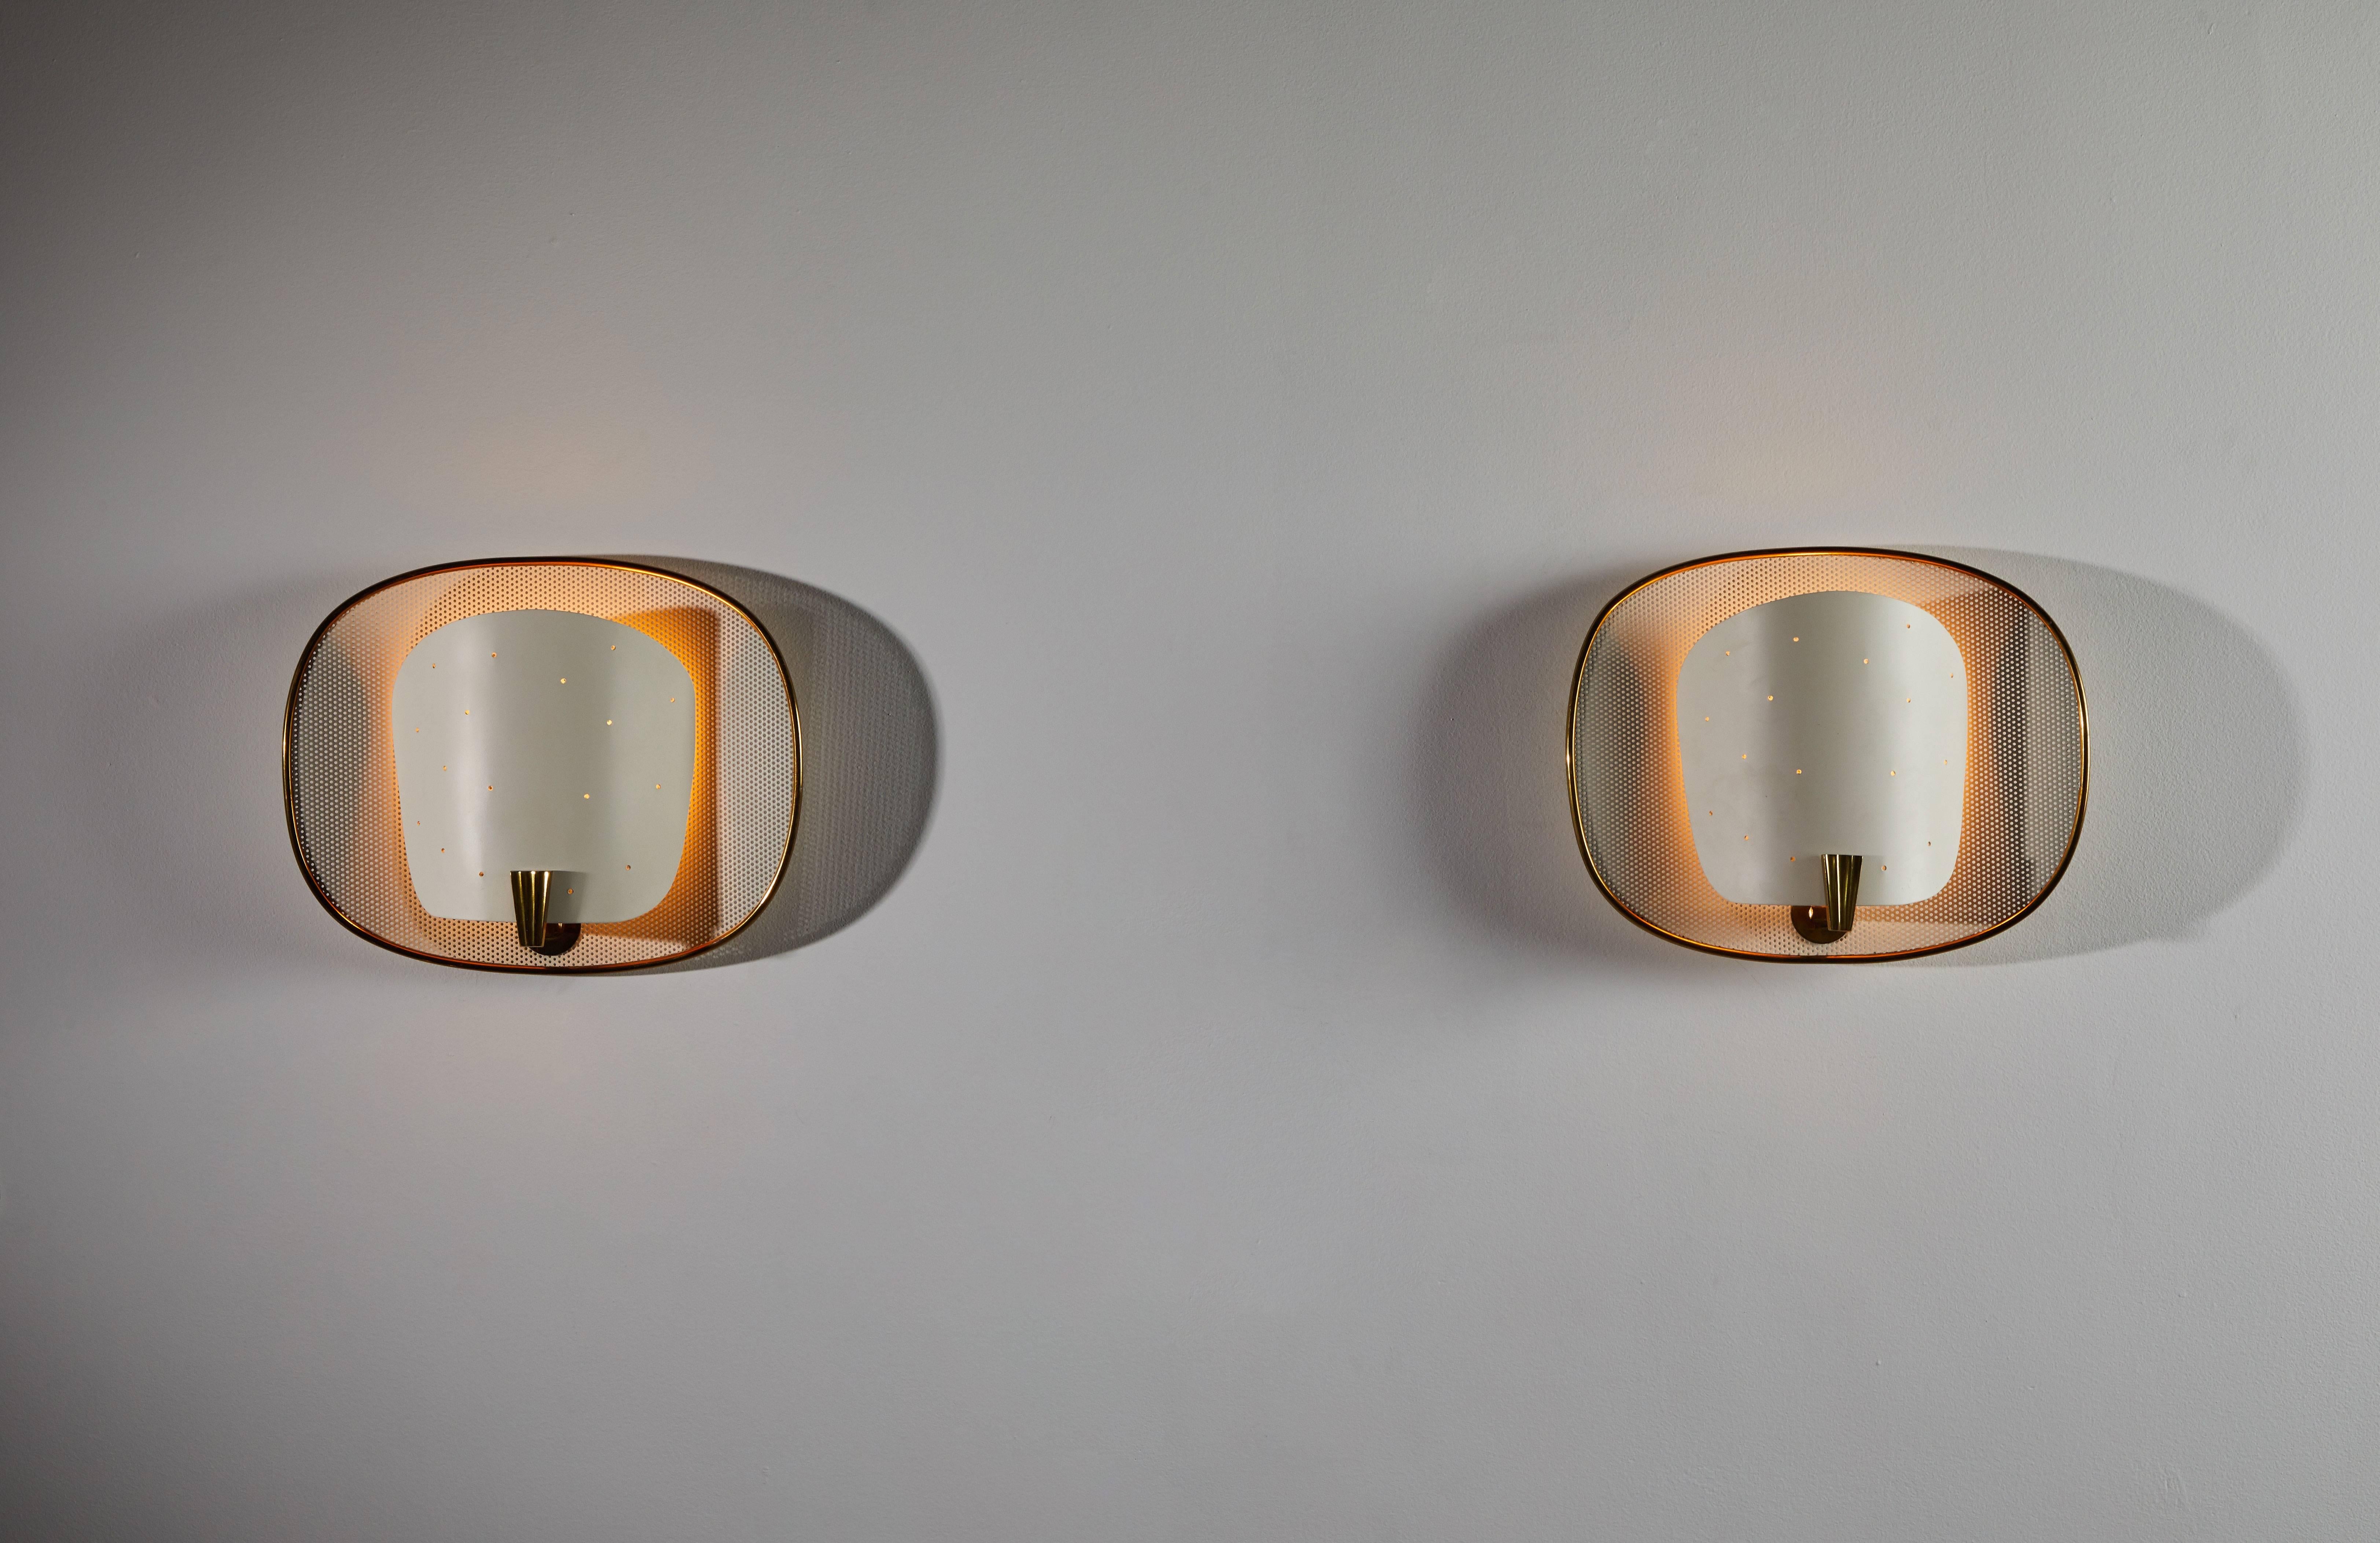 Pair of sconces by Lunel. Designed and manufactured in France, circa 1950s. Fully restored and powder coated shades with brass hardware. Wired for US junction boxes. Each light takes one E27 75w maximum bulb.